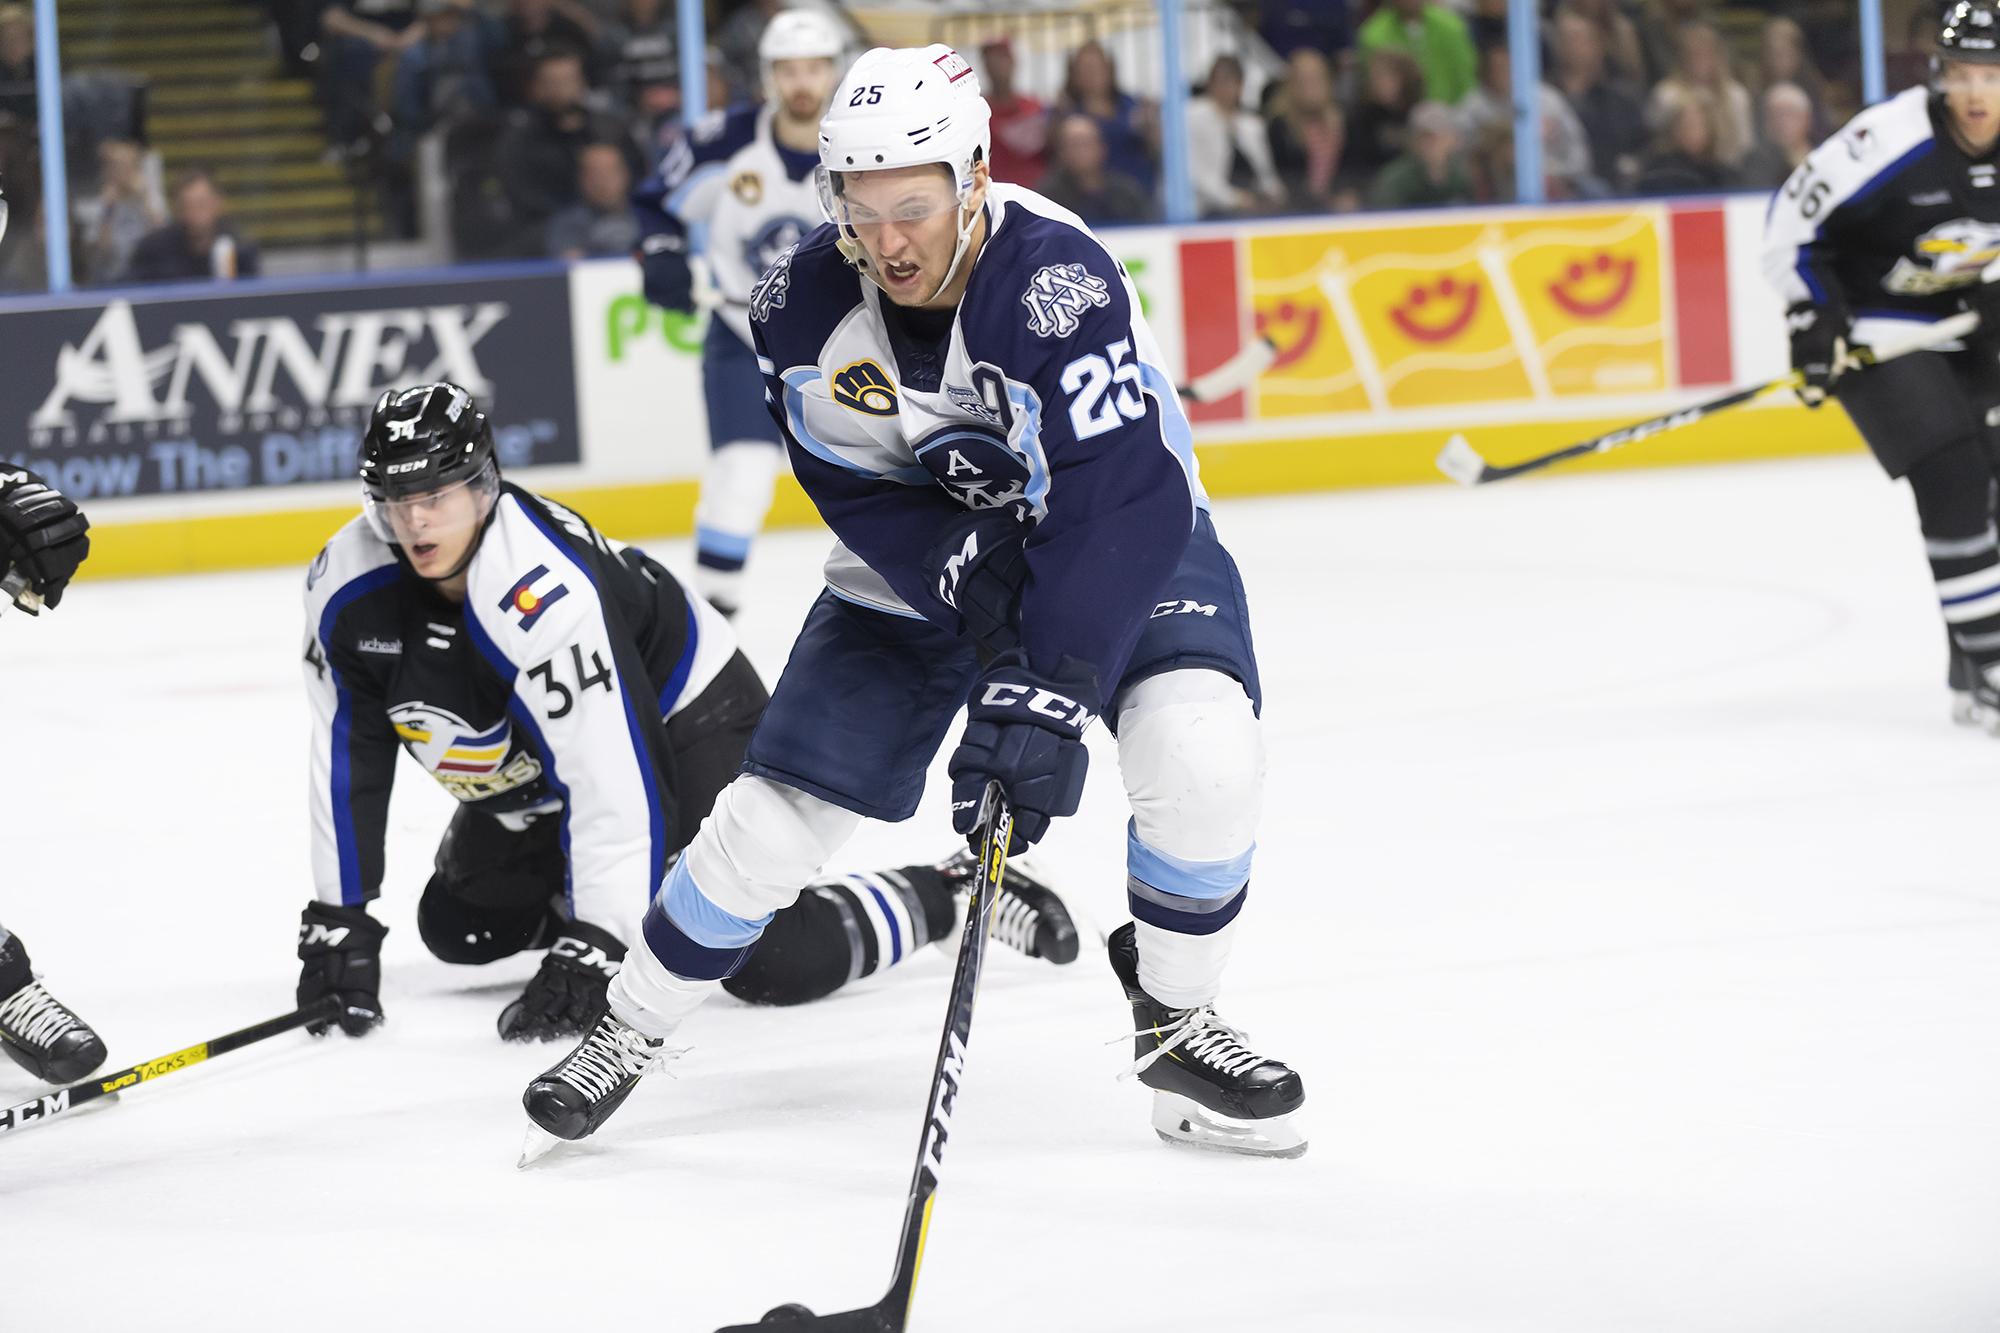 AMERICANS TRADE FOR ADMIRALS CAPTAIN